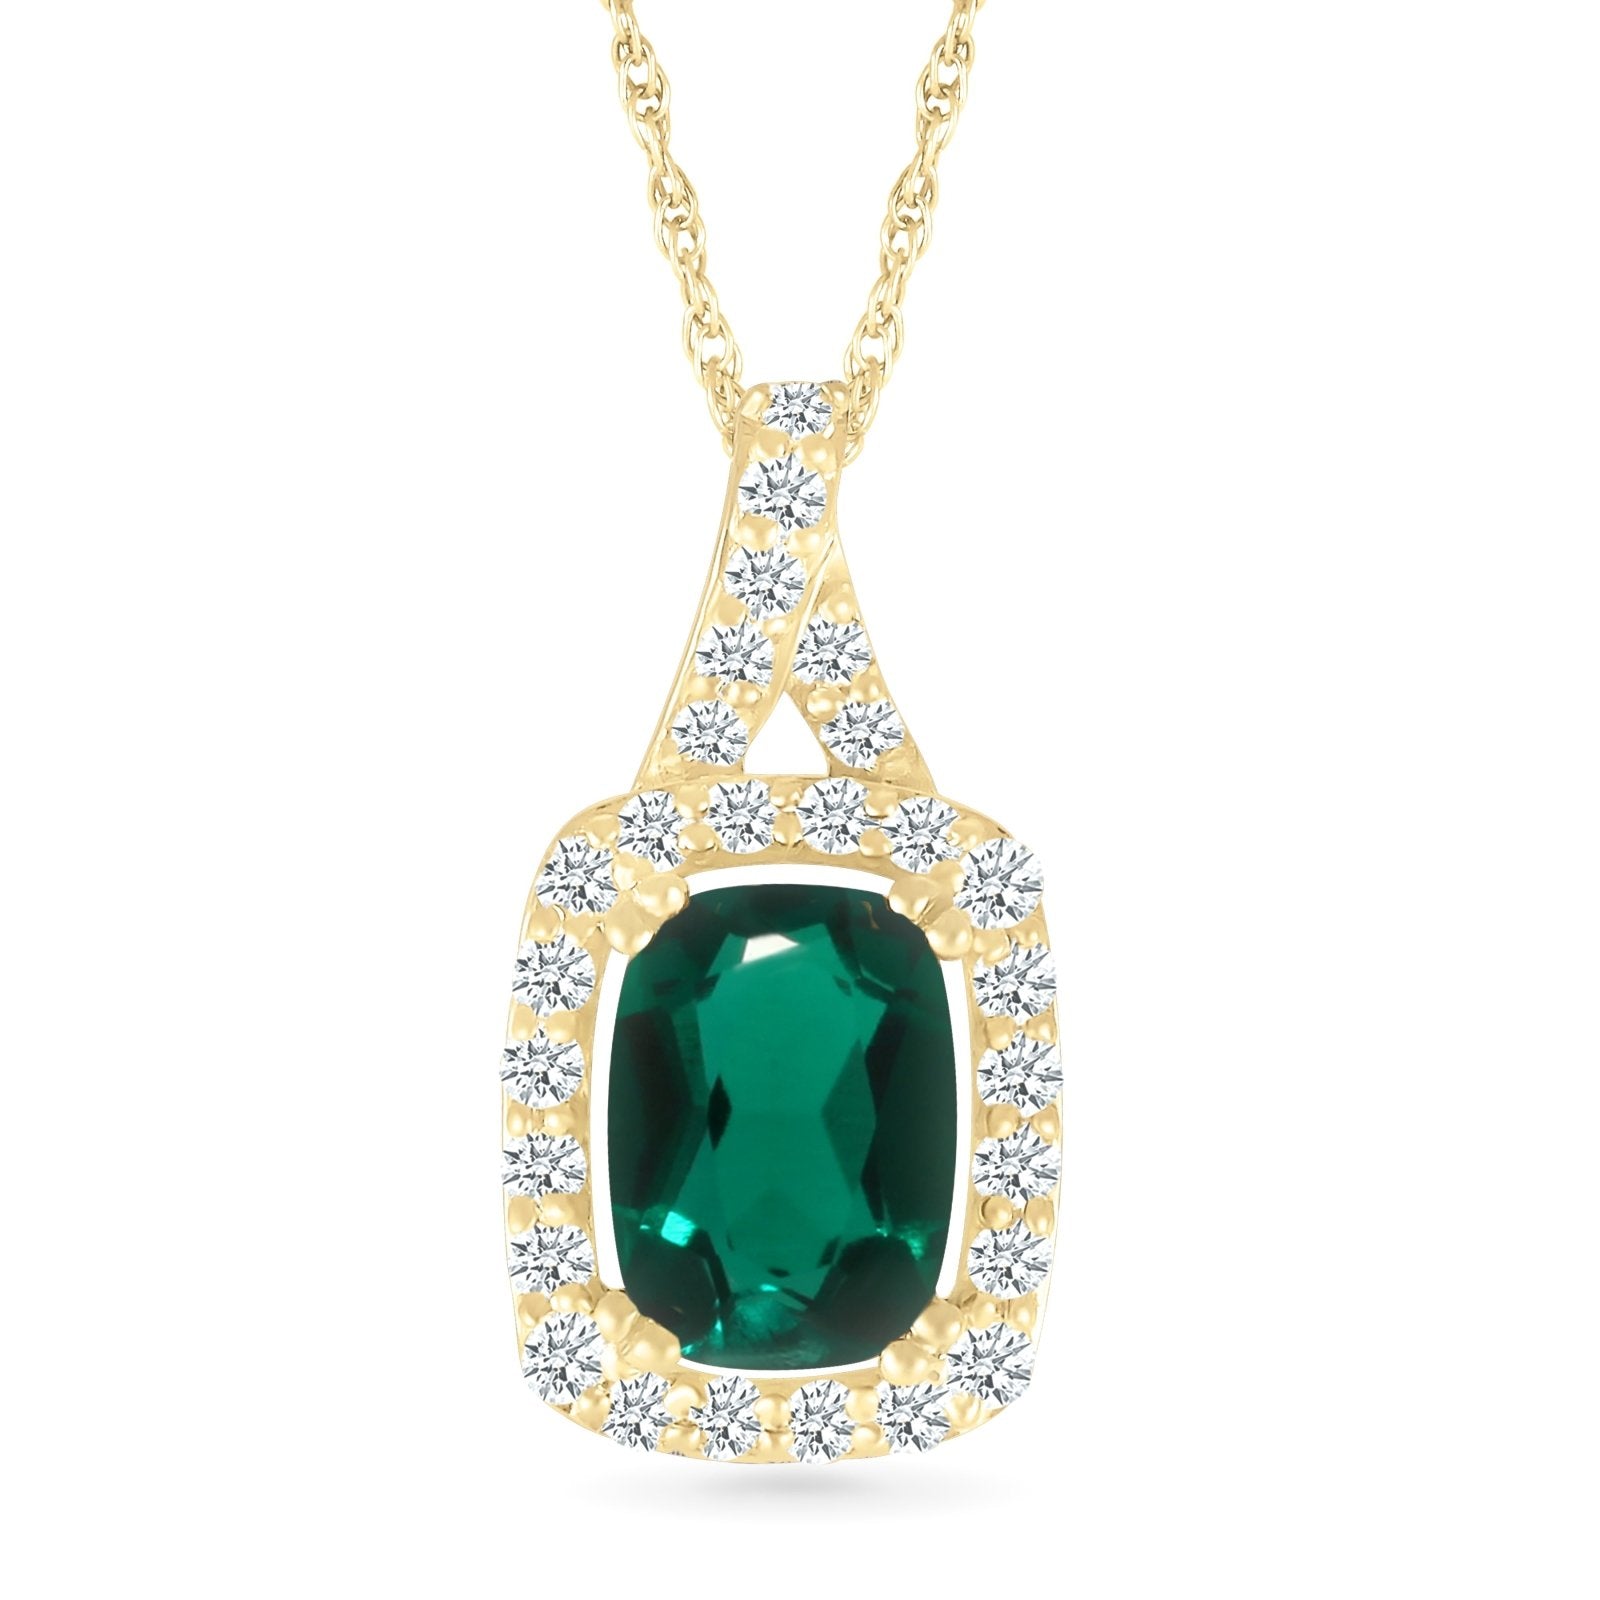 Cushion Cut Emerald Pendant with White Sapphire Halo and Bail Necklaces Estella Collection 32729 10k Birthstone Birthstone Jewelry #tag4# #tag5# #tag6# #tag7# #tag8# #tag9# #tag10#